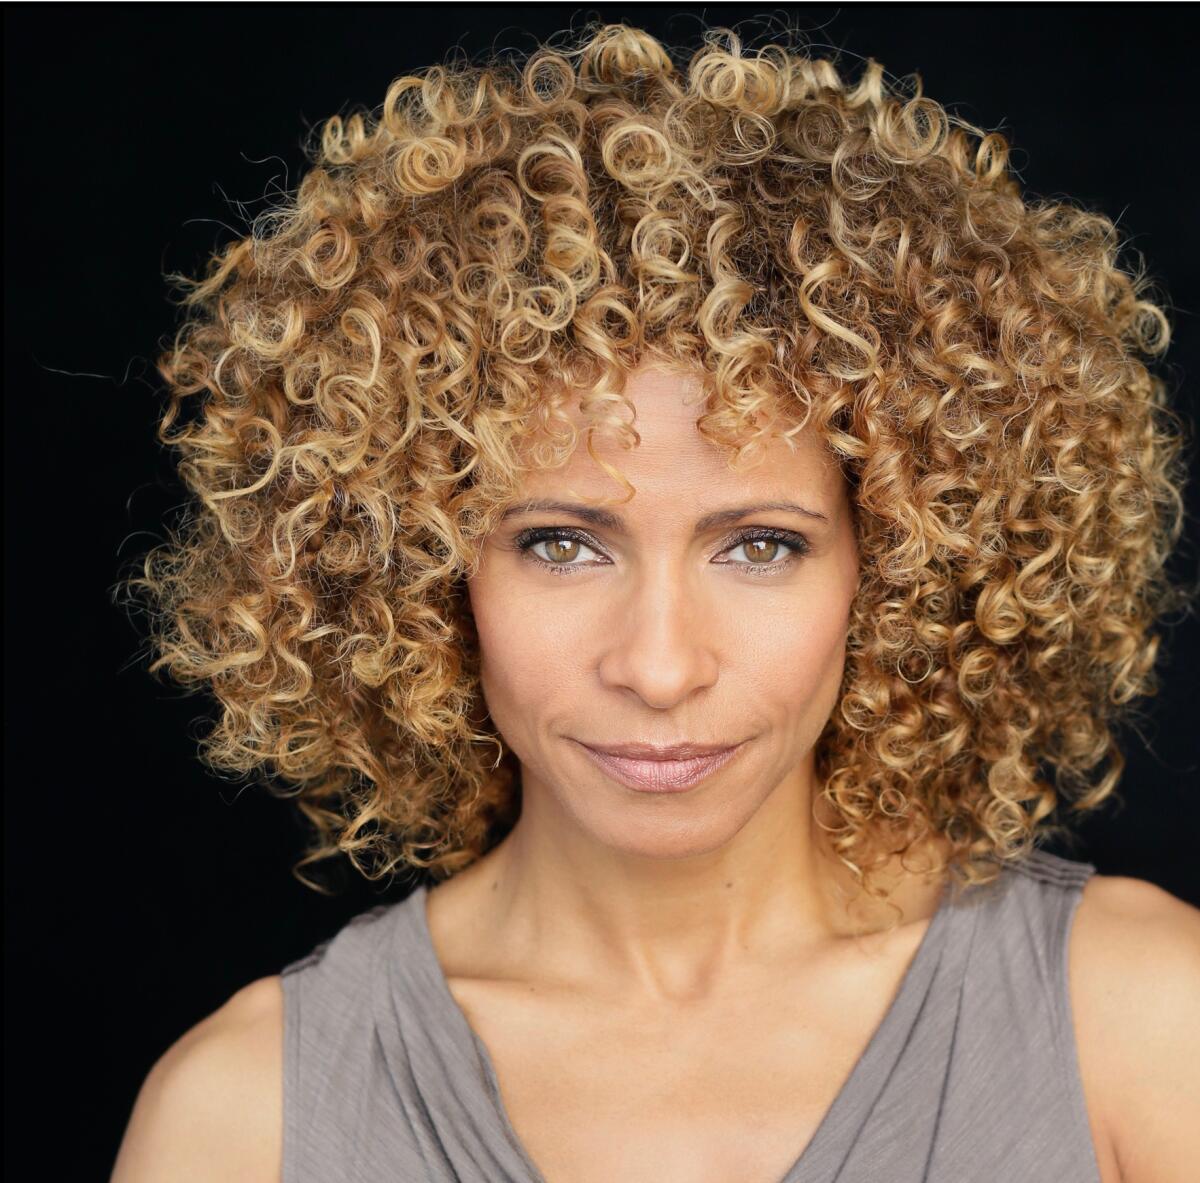 Michelle Hurd, actor and SAG-AFTRA national board member